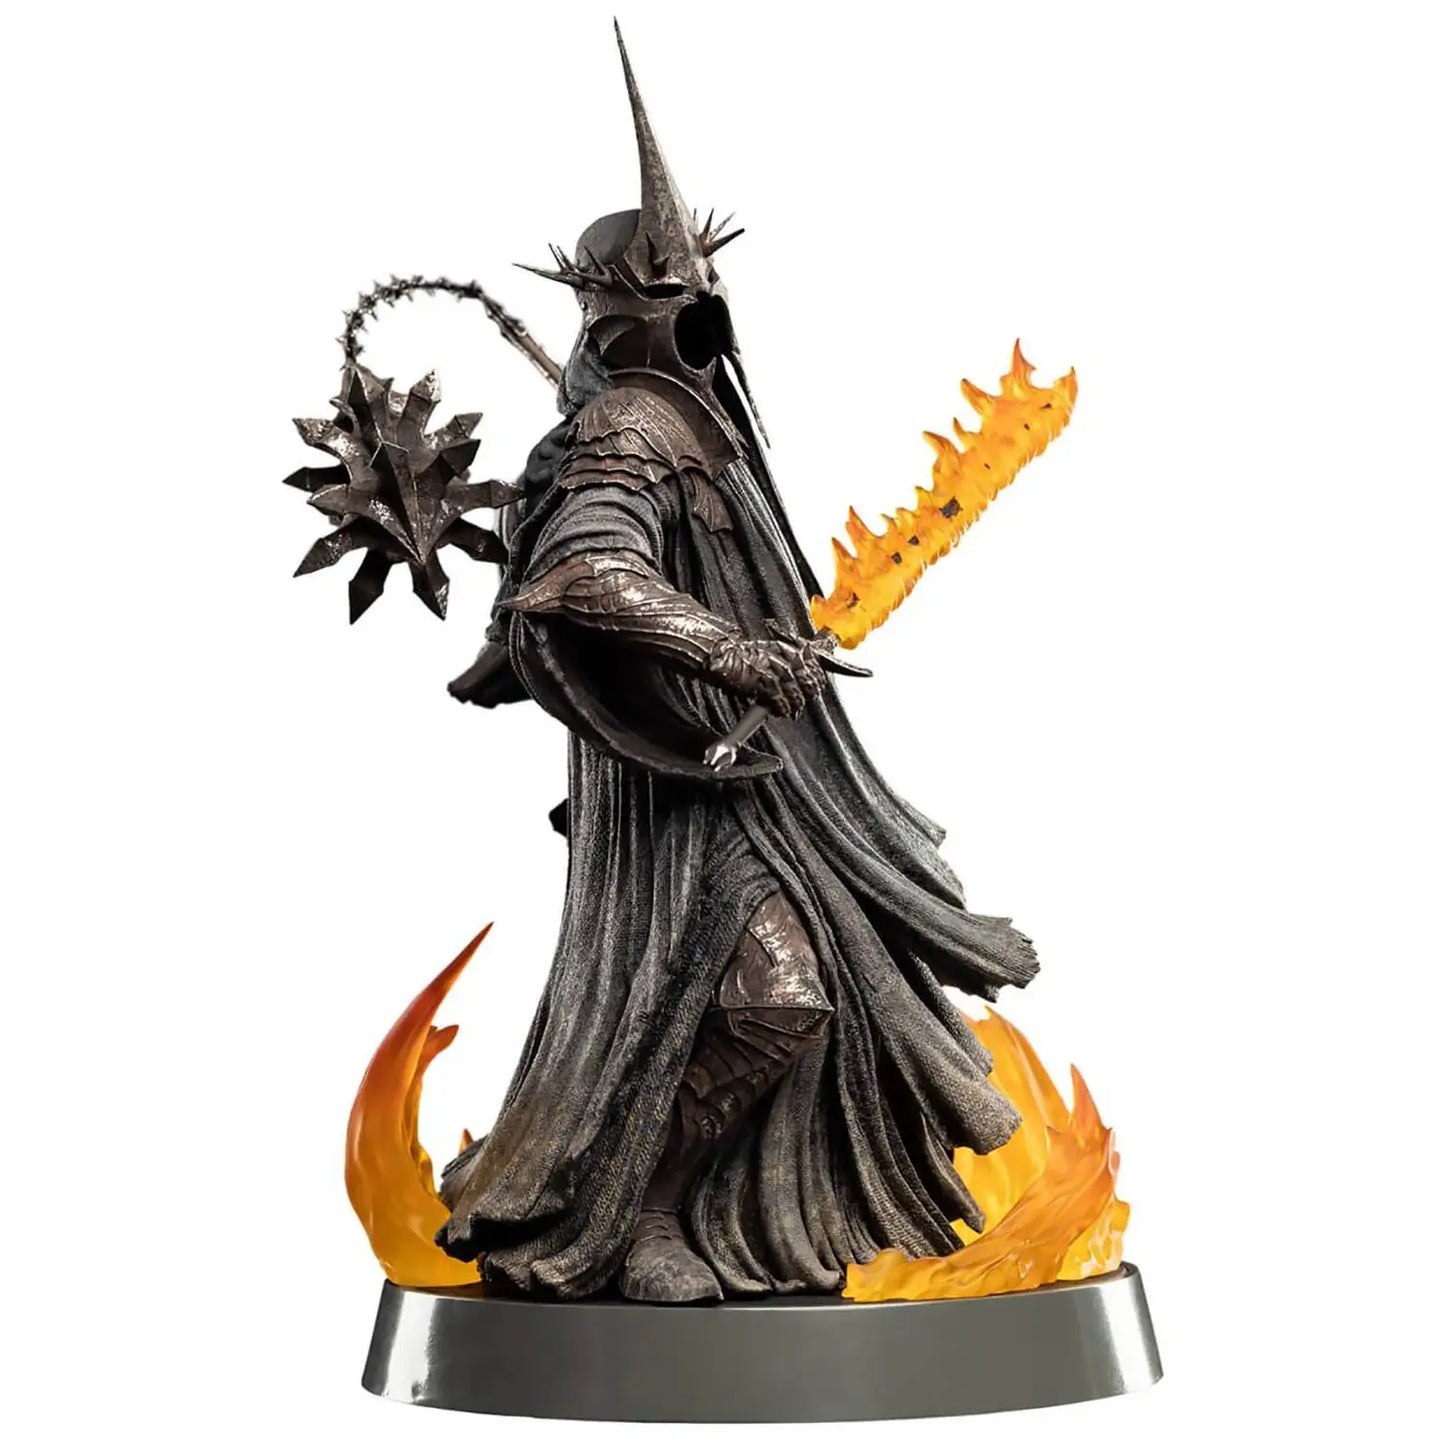 Witch-King of Angmar (Lord of the Rings) Figures of Fandom Statue by Weta Workshop